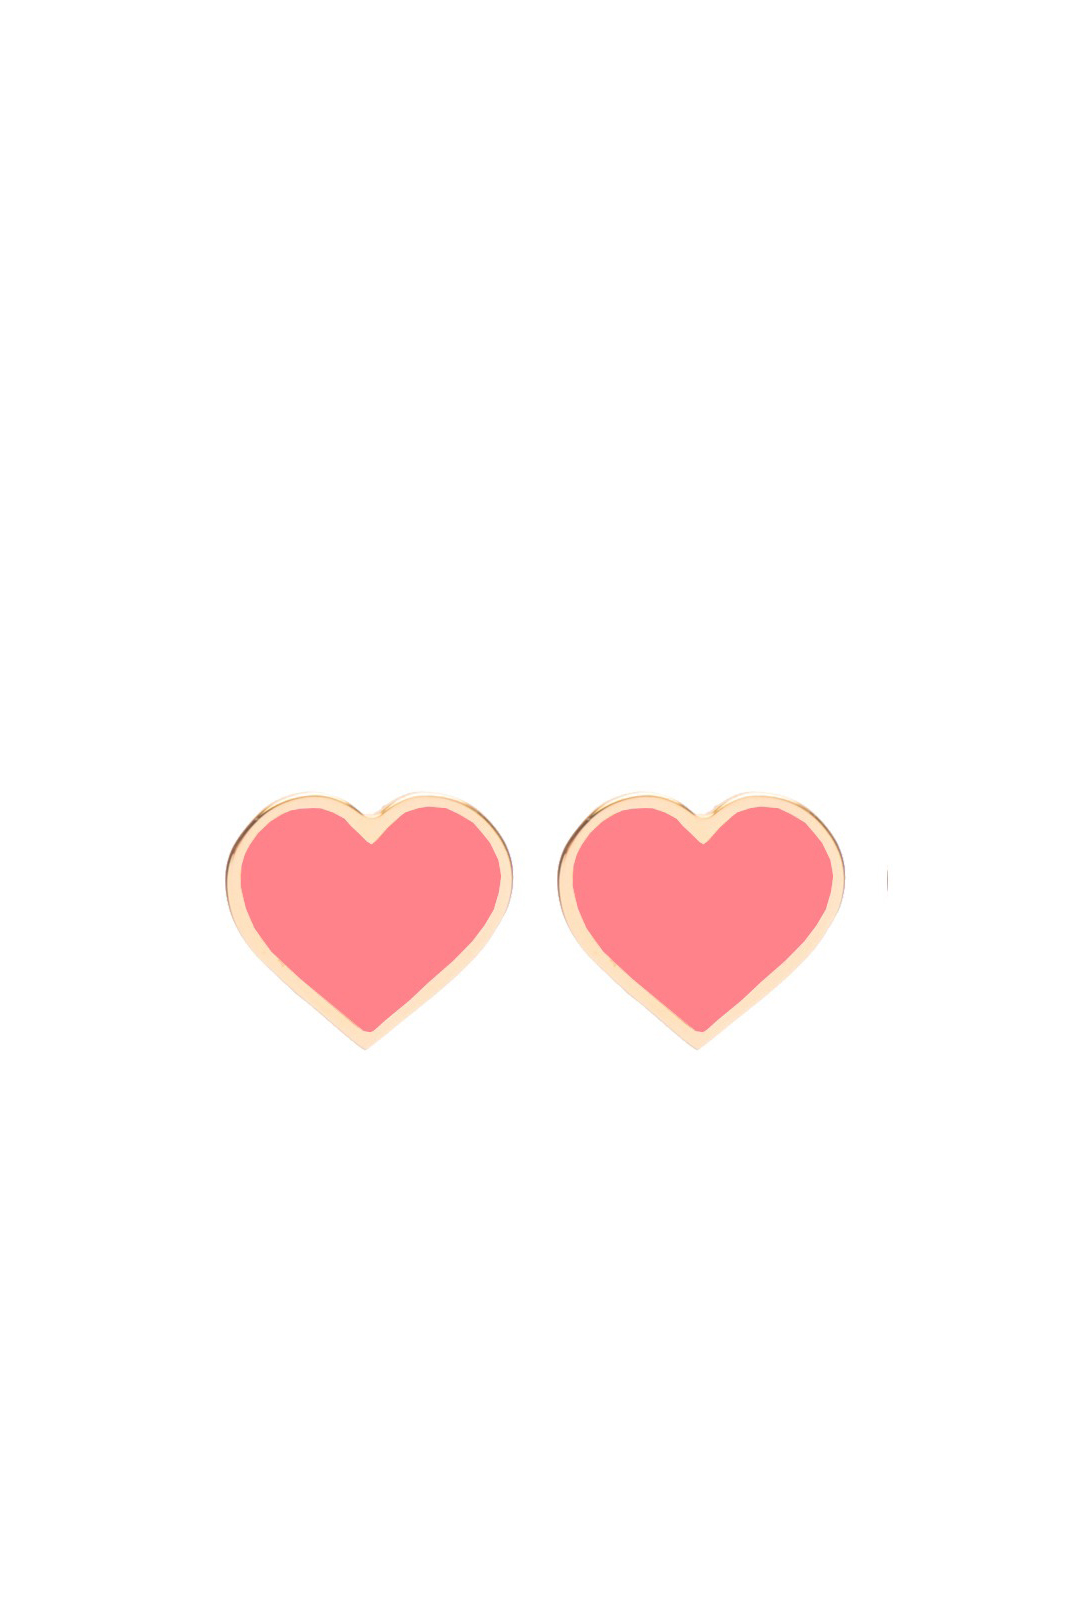 FRANCESCA BIANCHI | 24-karat gold-plated stop-gap earrings with coral red enamelled hearts | coral red heart stud earrings